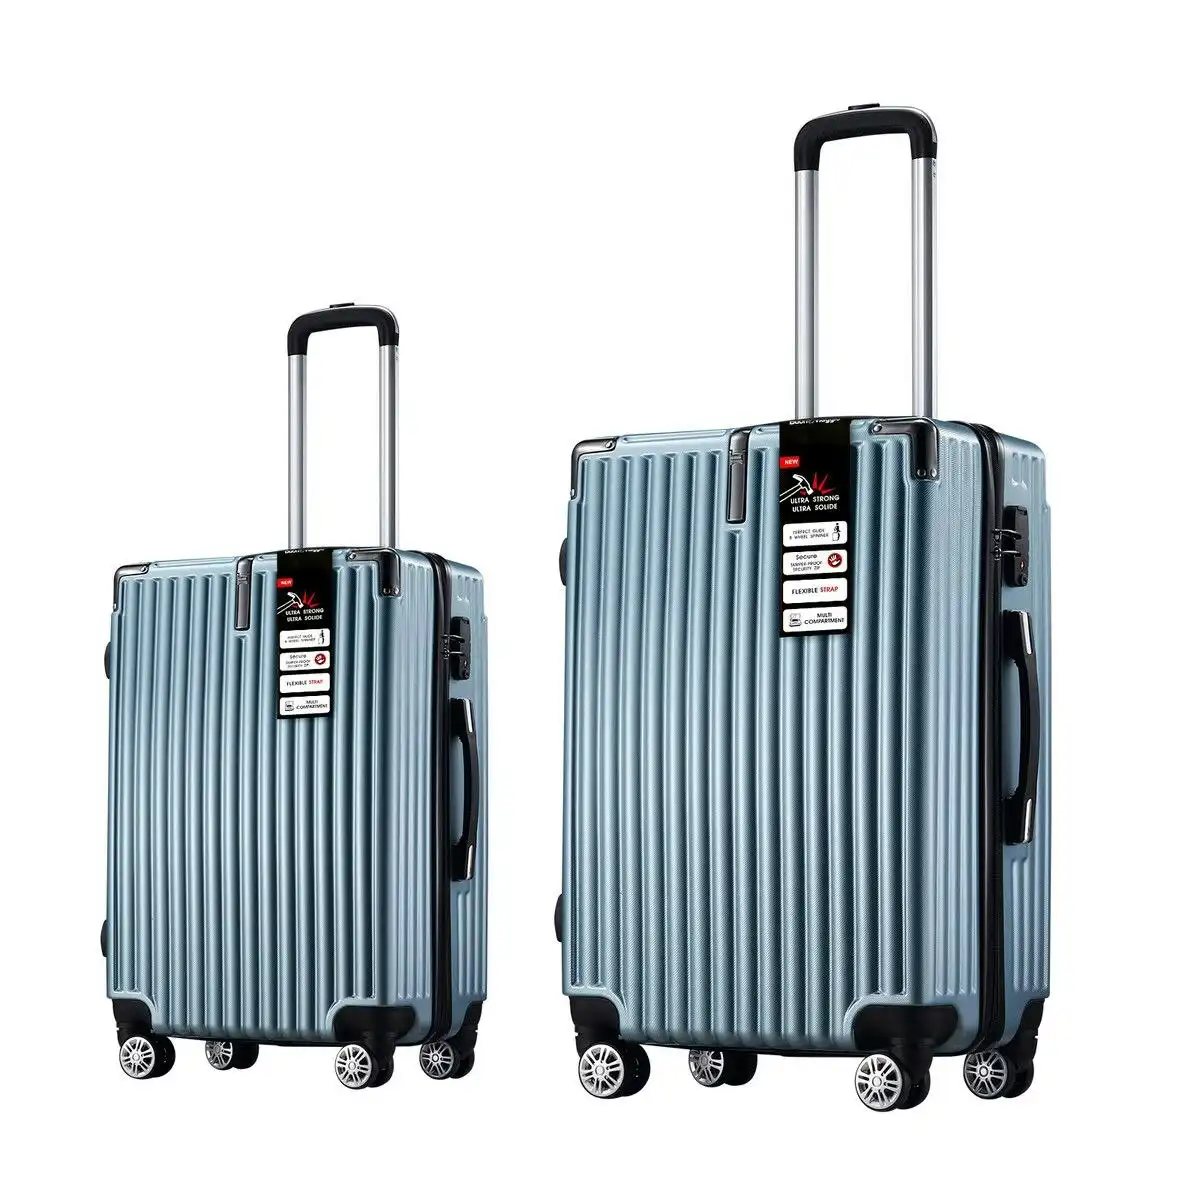 Buon Viaggio 2 PCS Luggage Set Suitcases Carry On Spinner Traveller Bags Cabin Hard Shell Case Trolley Lightweight Travel Storage Rolling TSA Lock Ice Blue